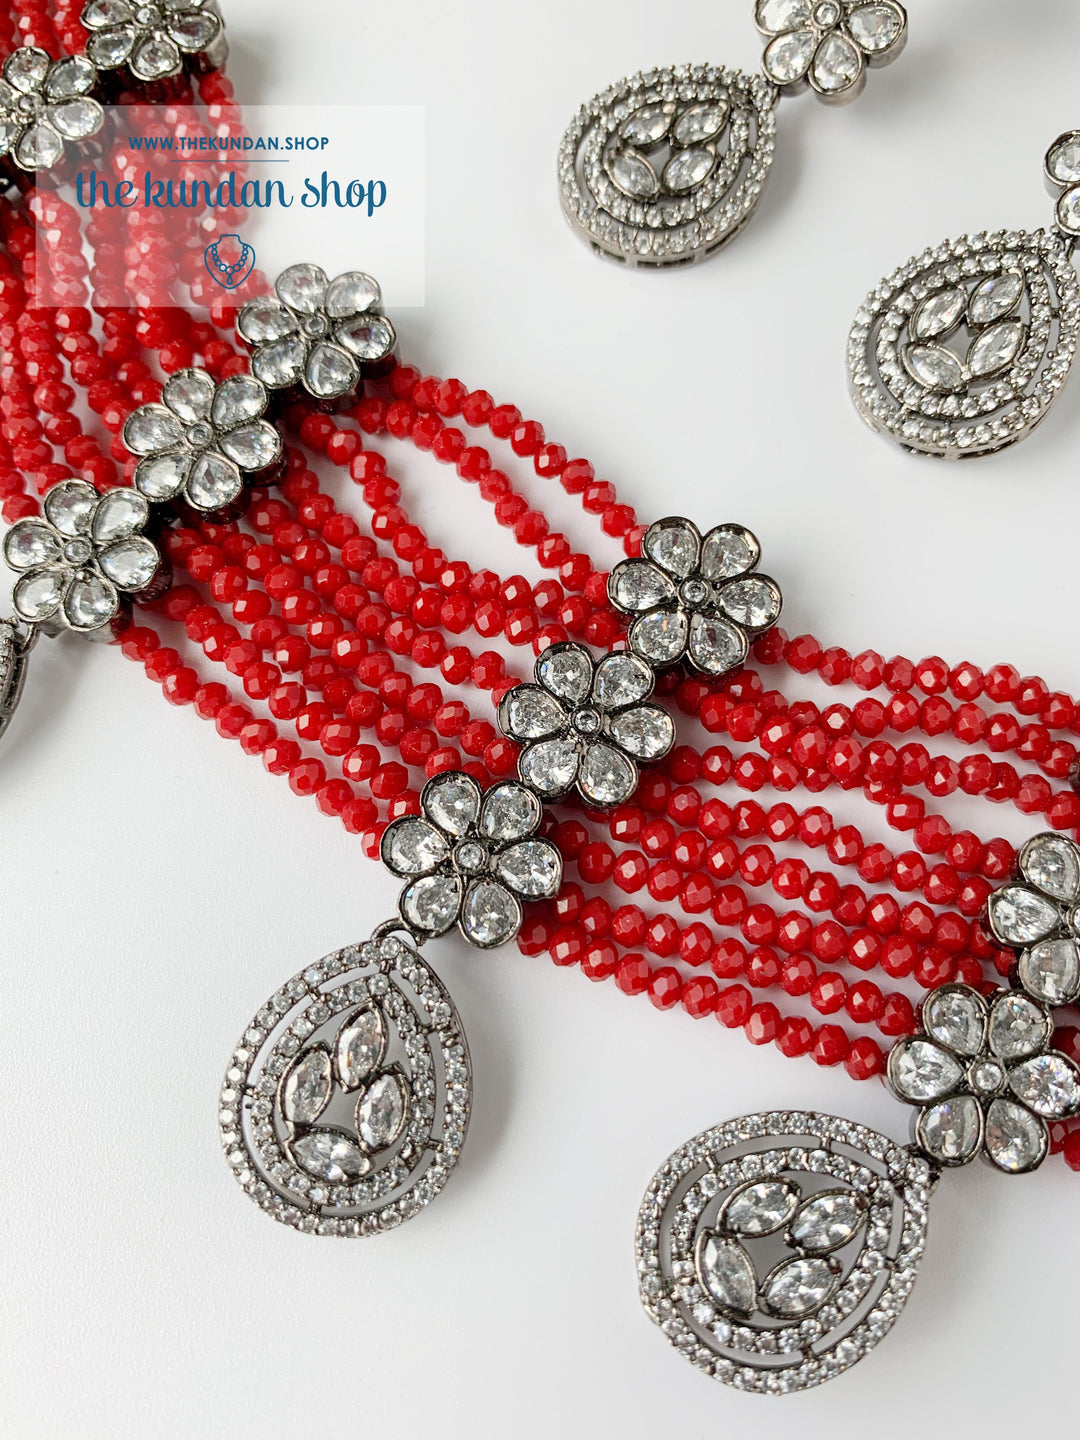 Posh in Red Necklace Sets THE KUNDAN SHOP 